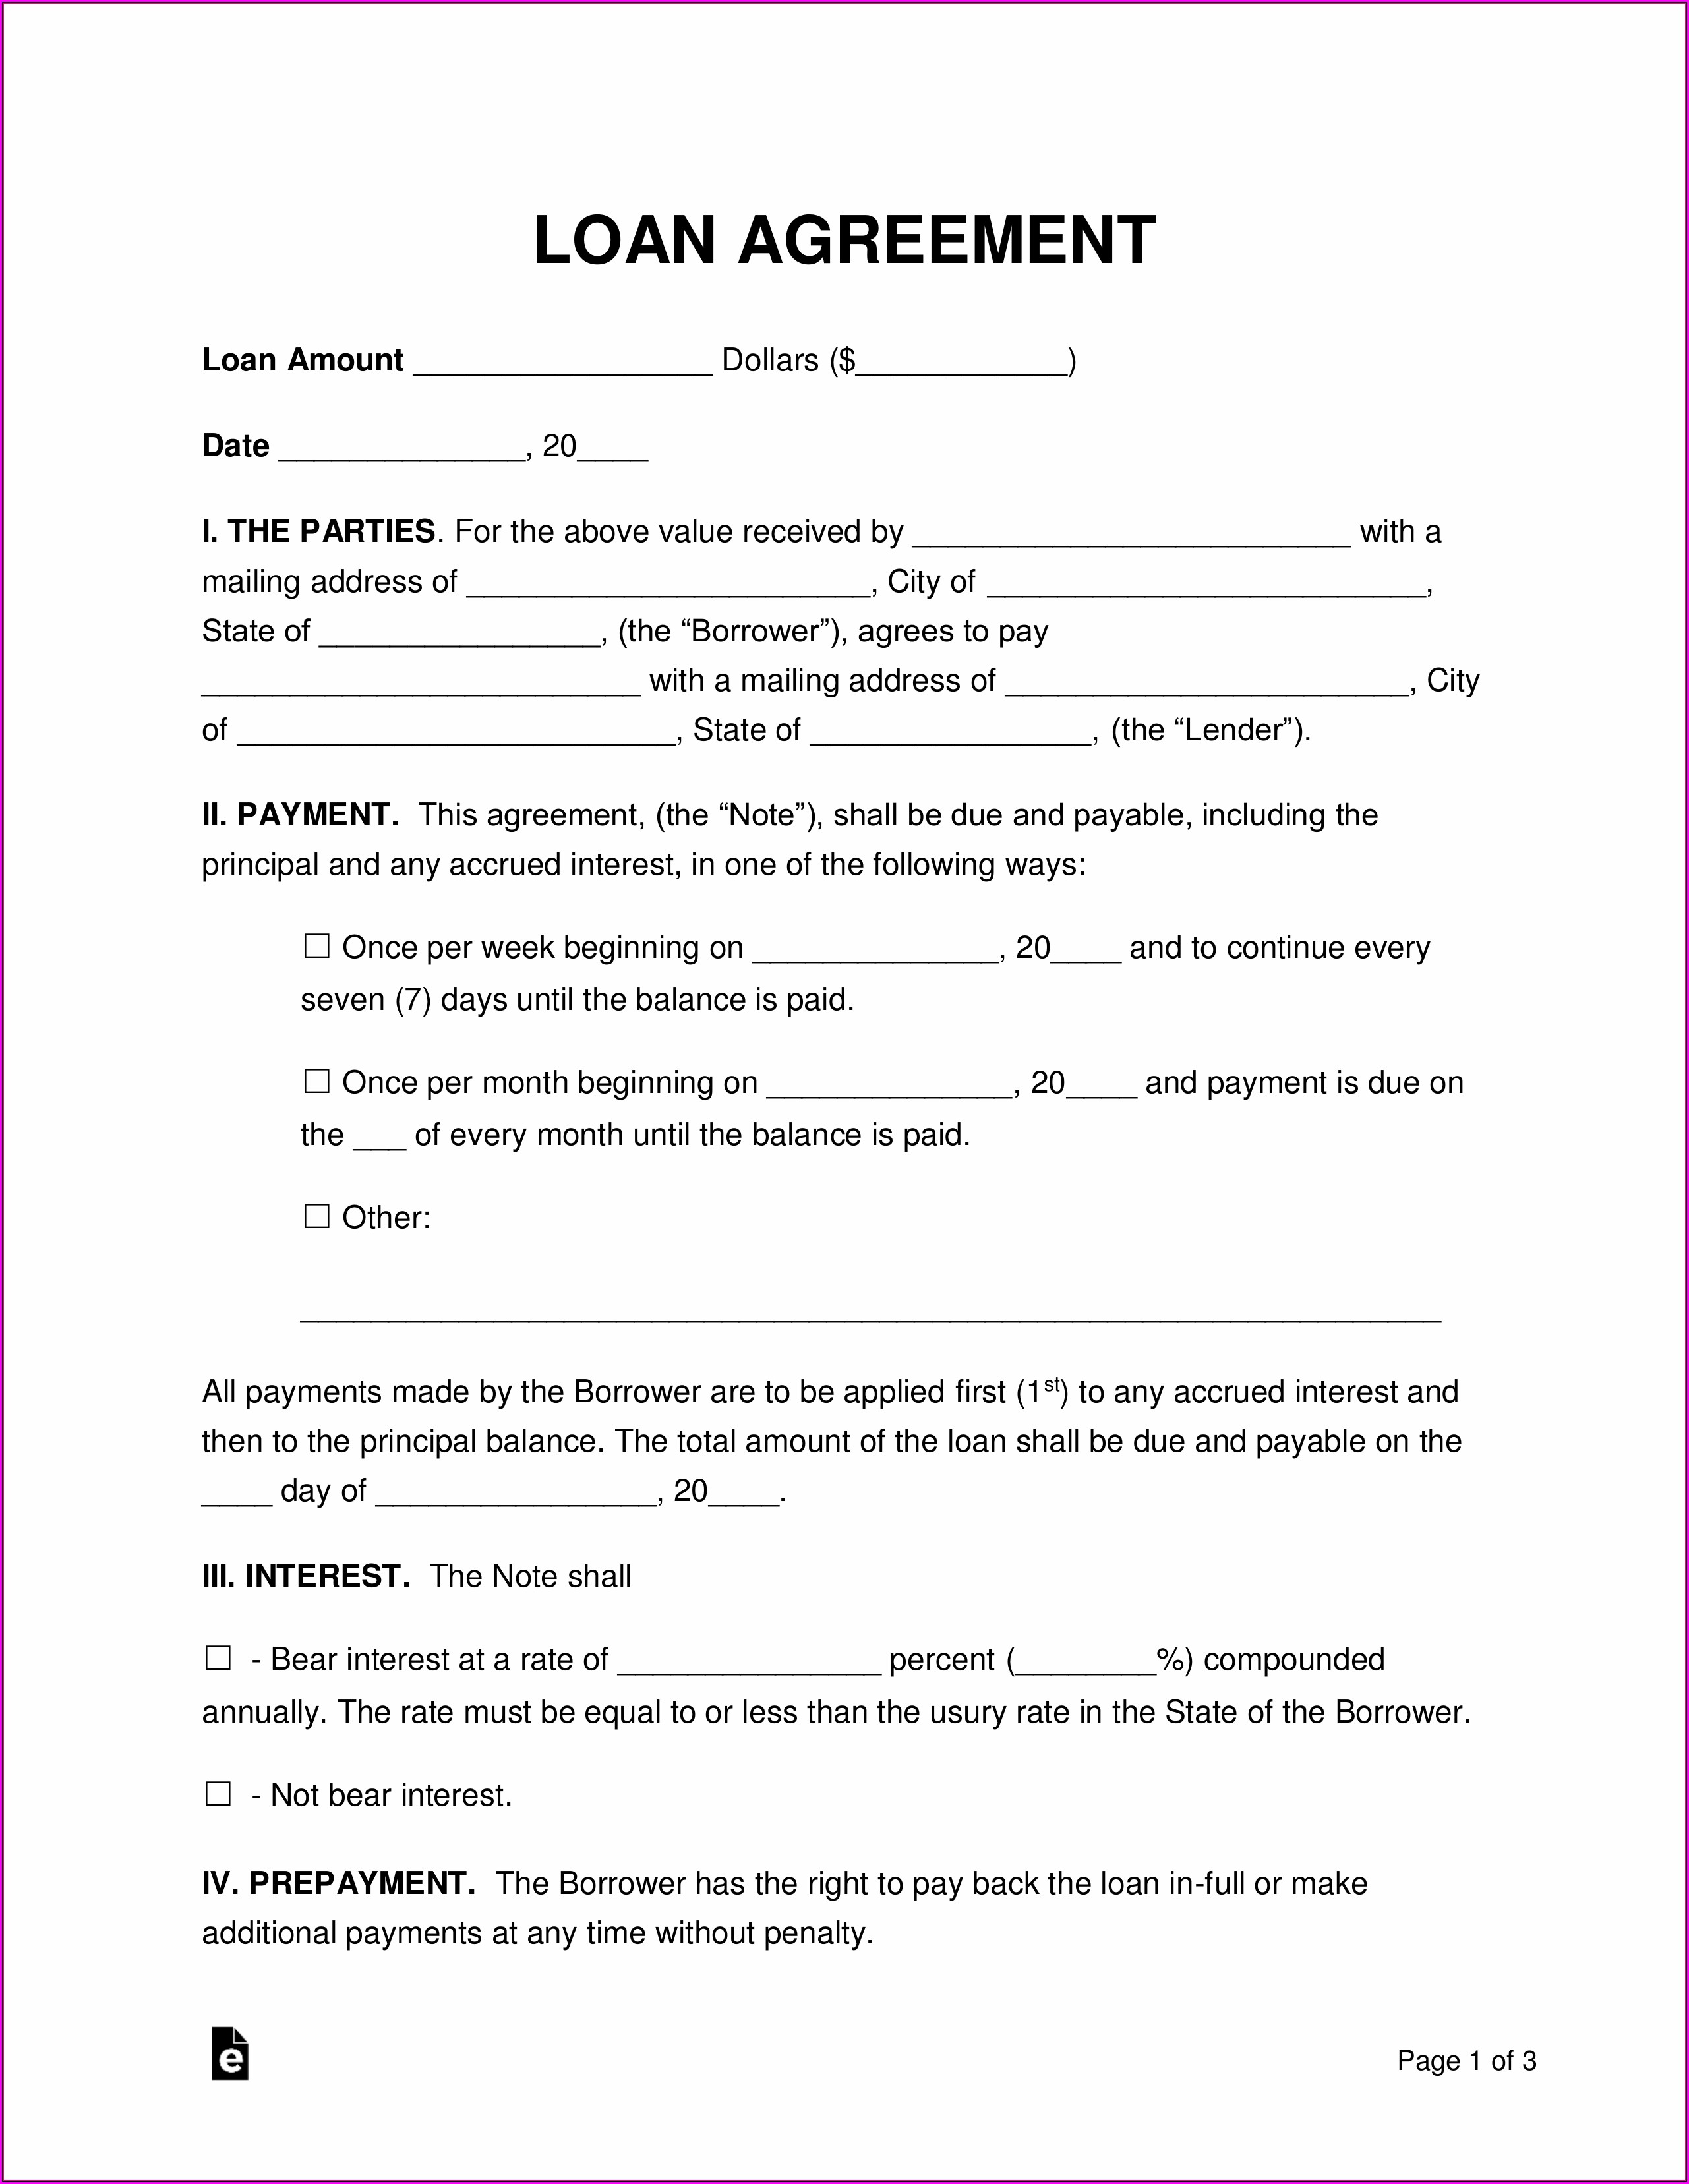 Loan Agreement Form Example